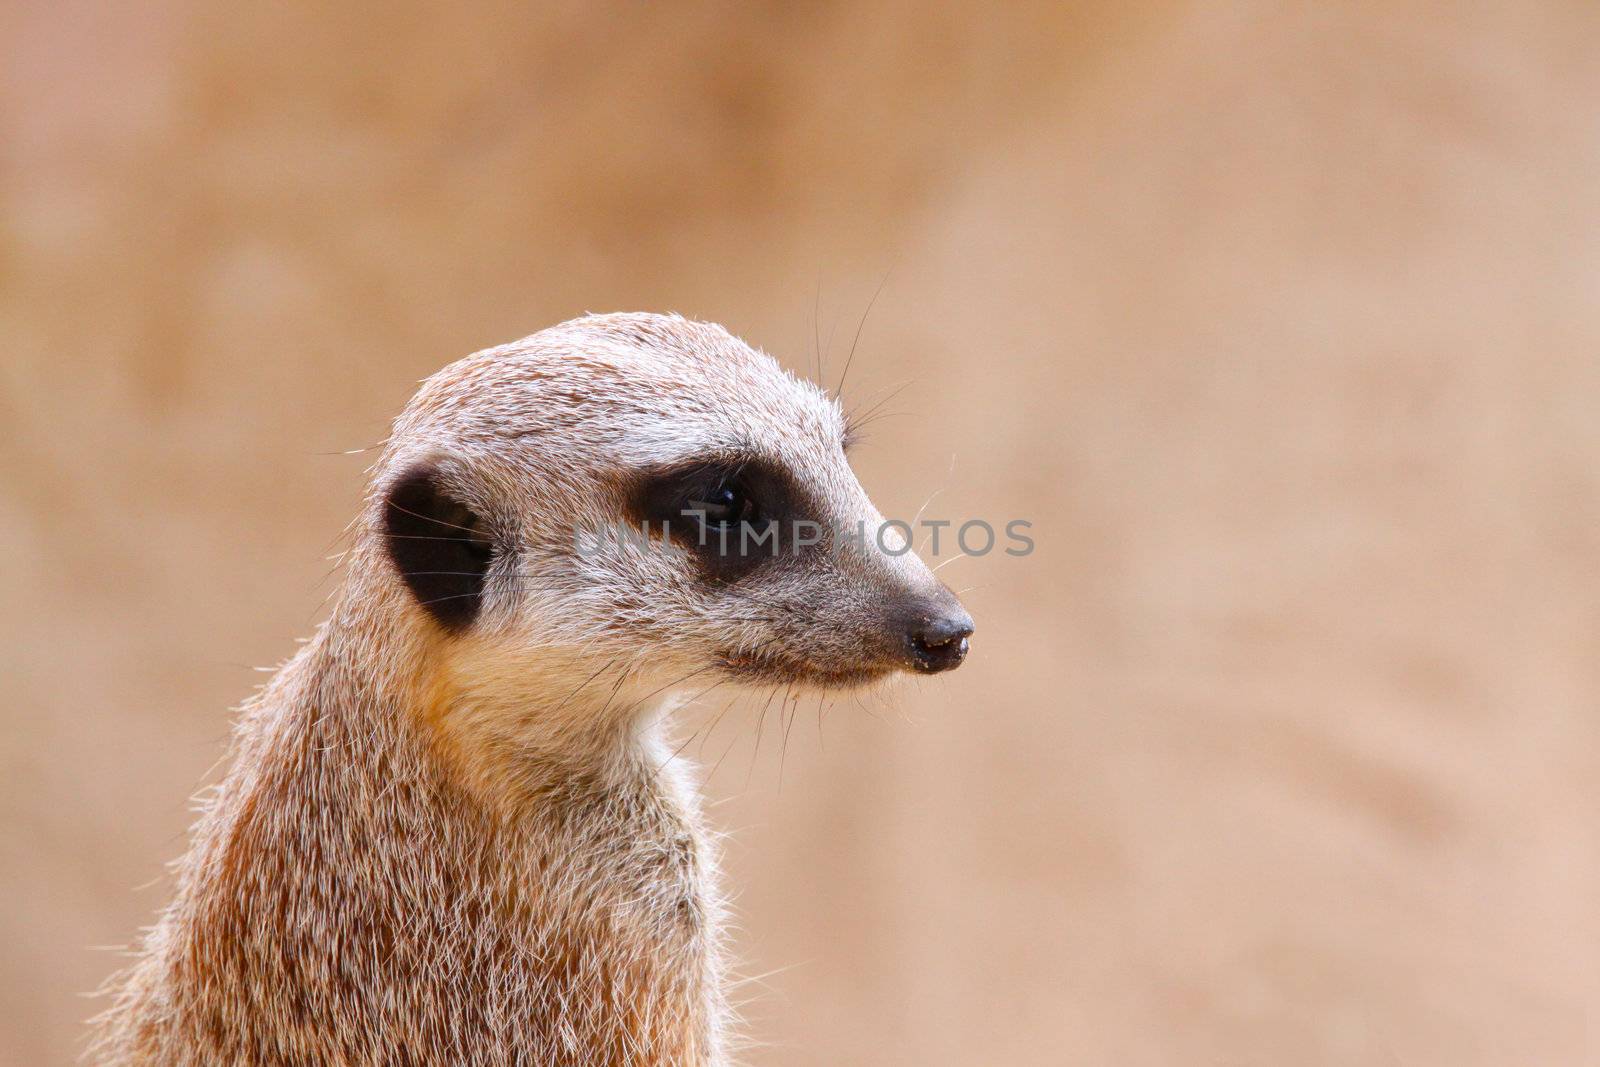 Upright Meerkat on Sentry with Matching/Camouflage Background